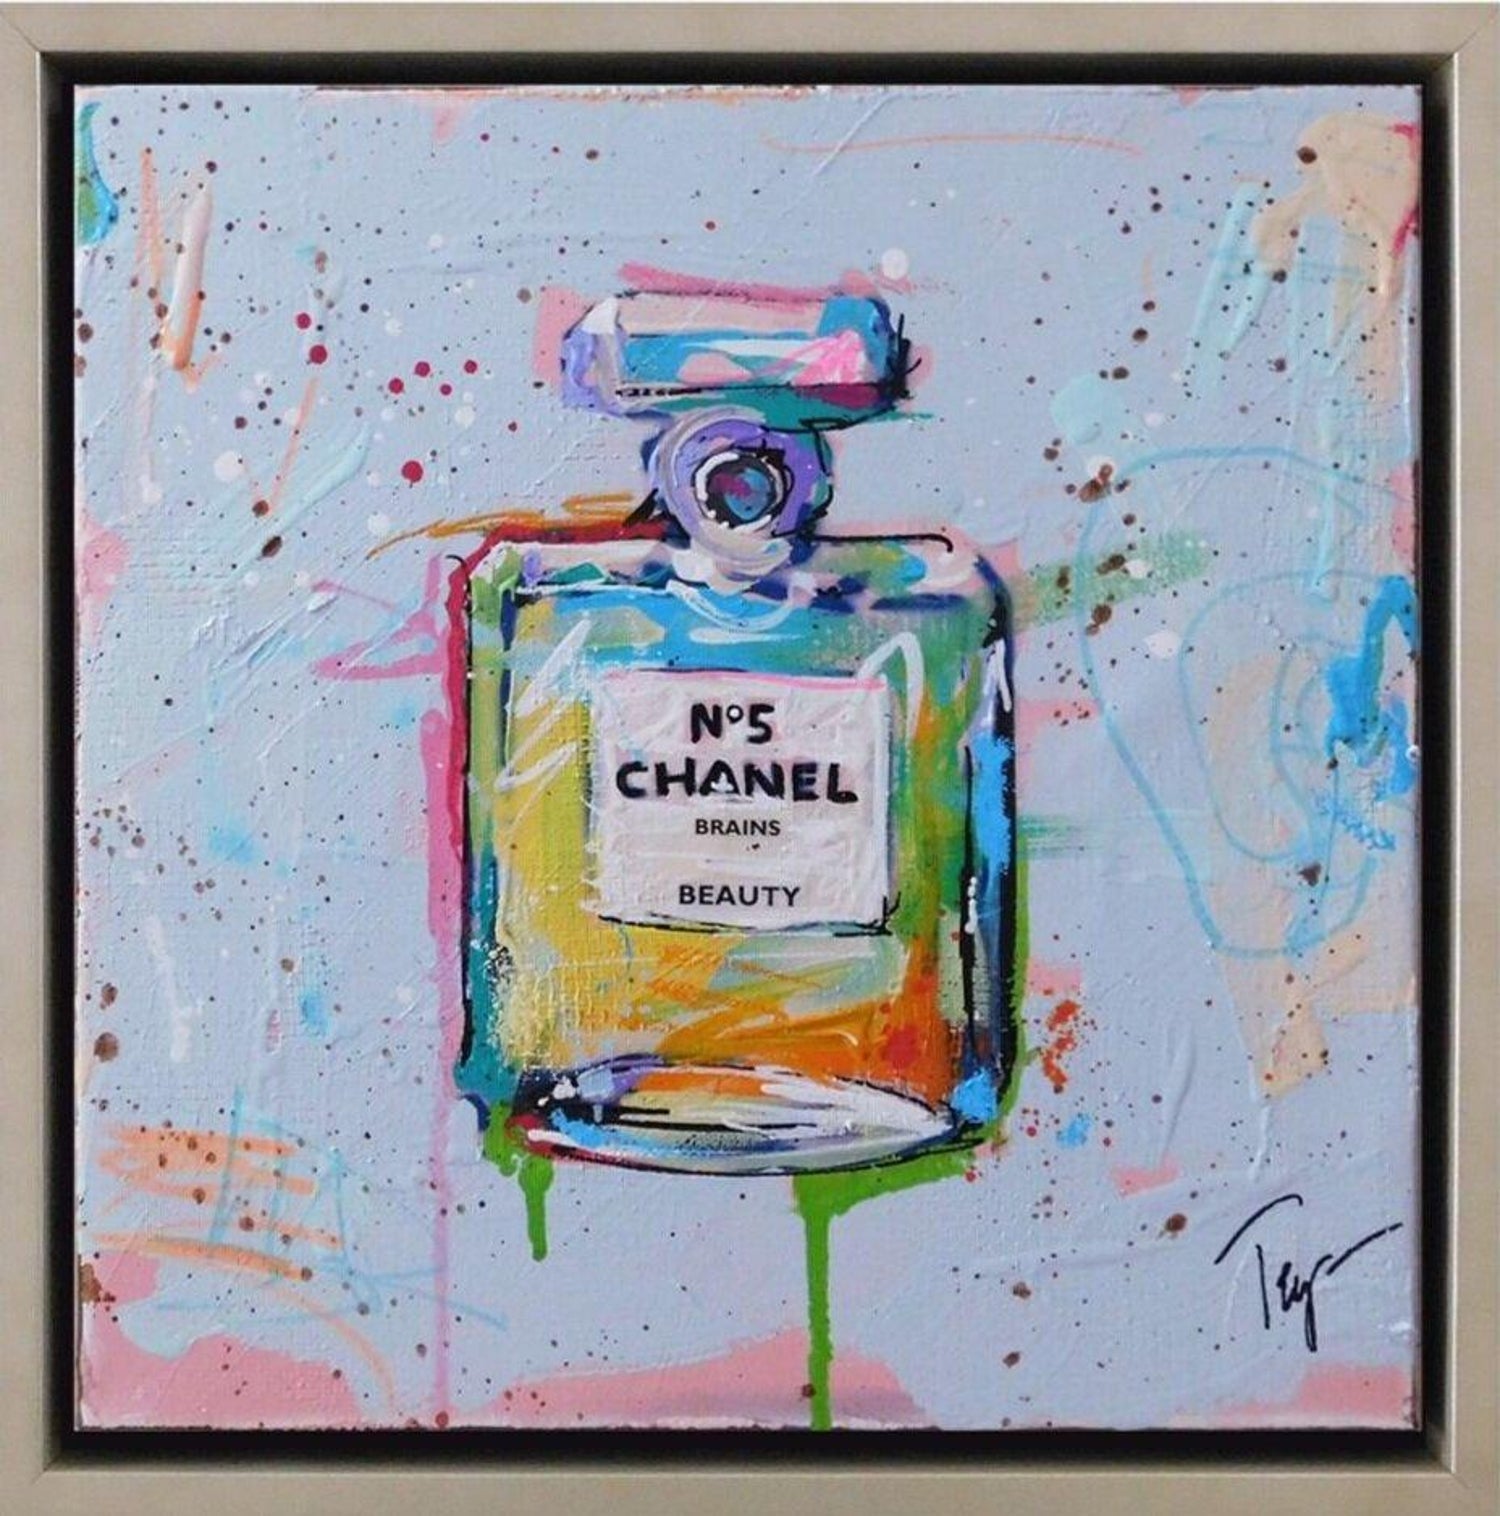 Trip Park, Spirited Chanel, 12x12 Colorful Chanel No5 Perfume Bottle  Painting